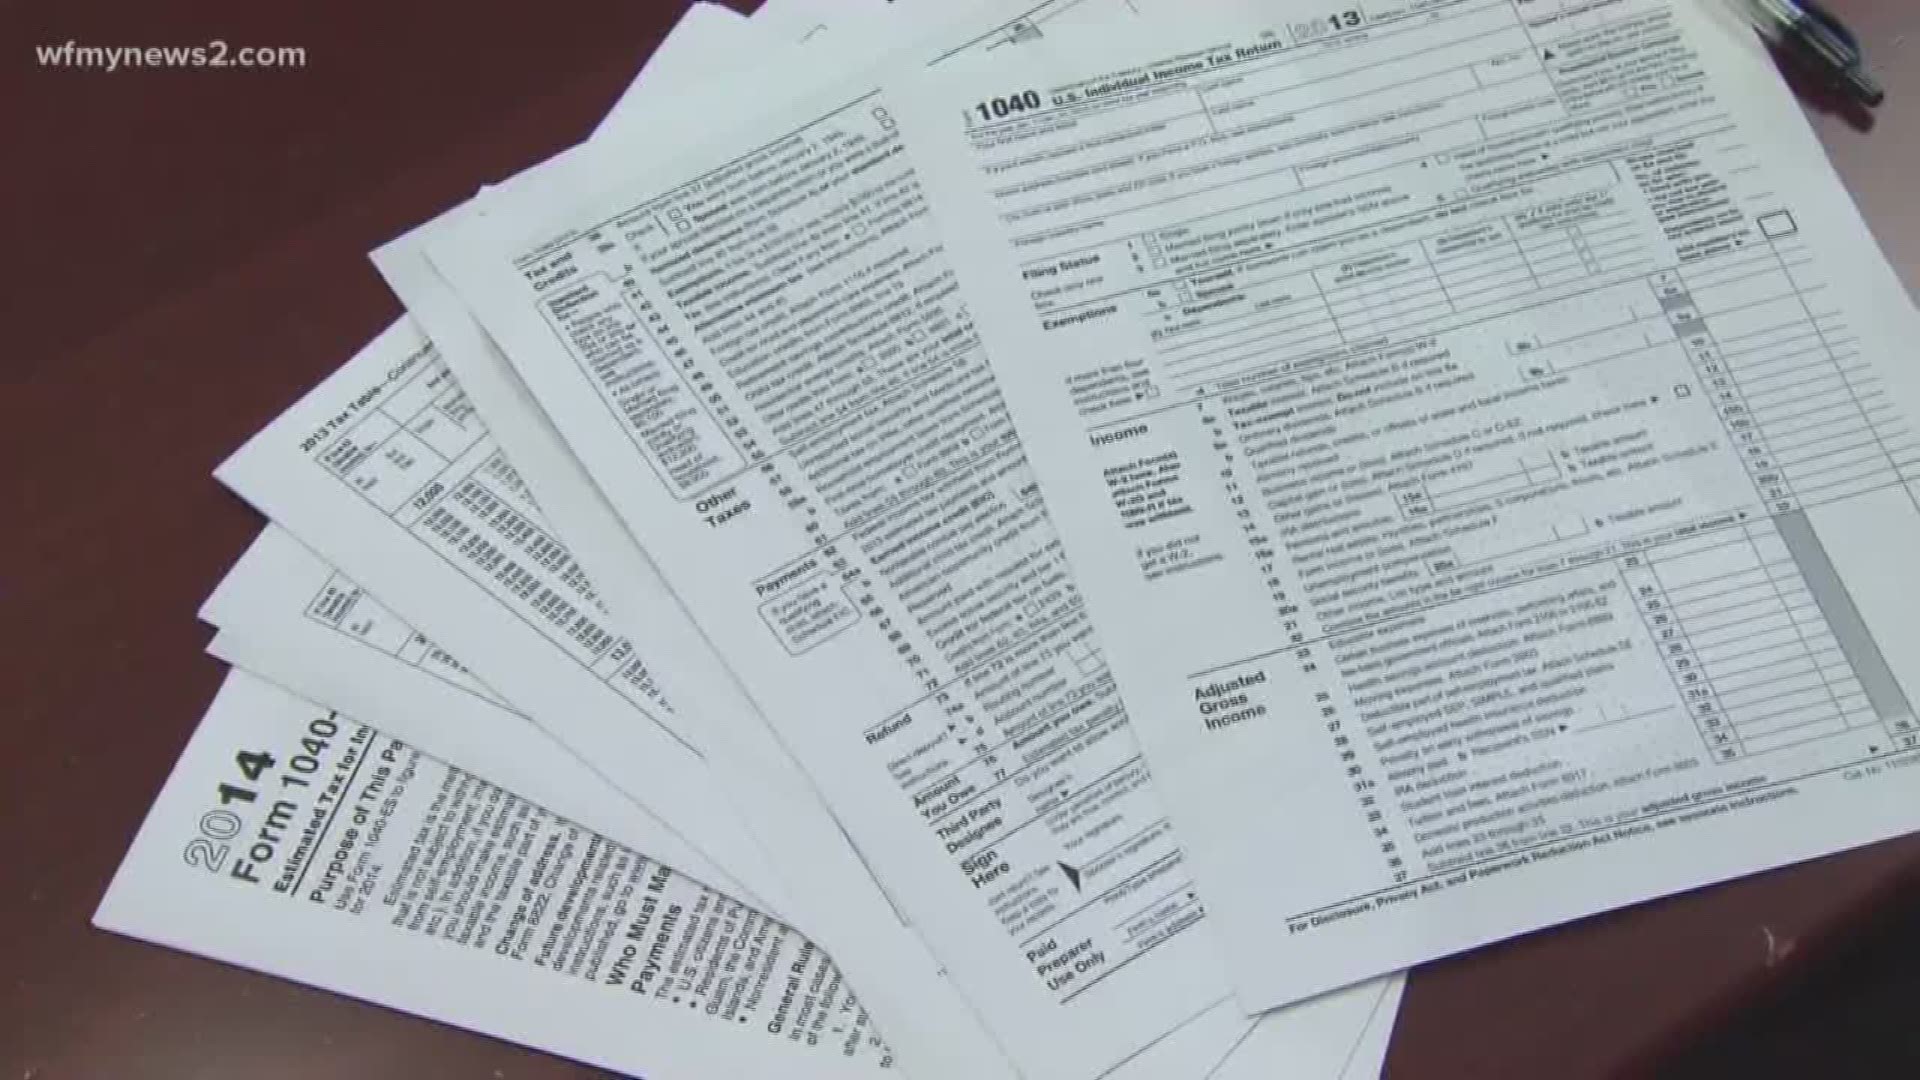 Tax experts say you'll almost certainly receive a tax refund within three weeks of filing your tax return.